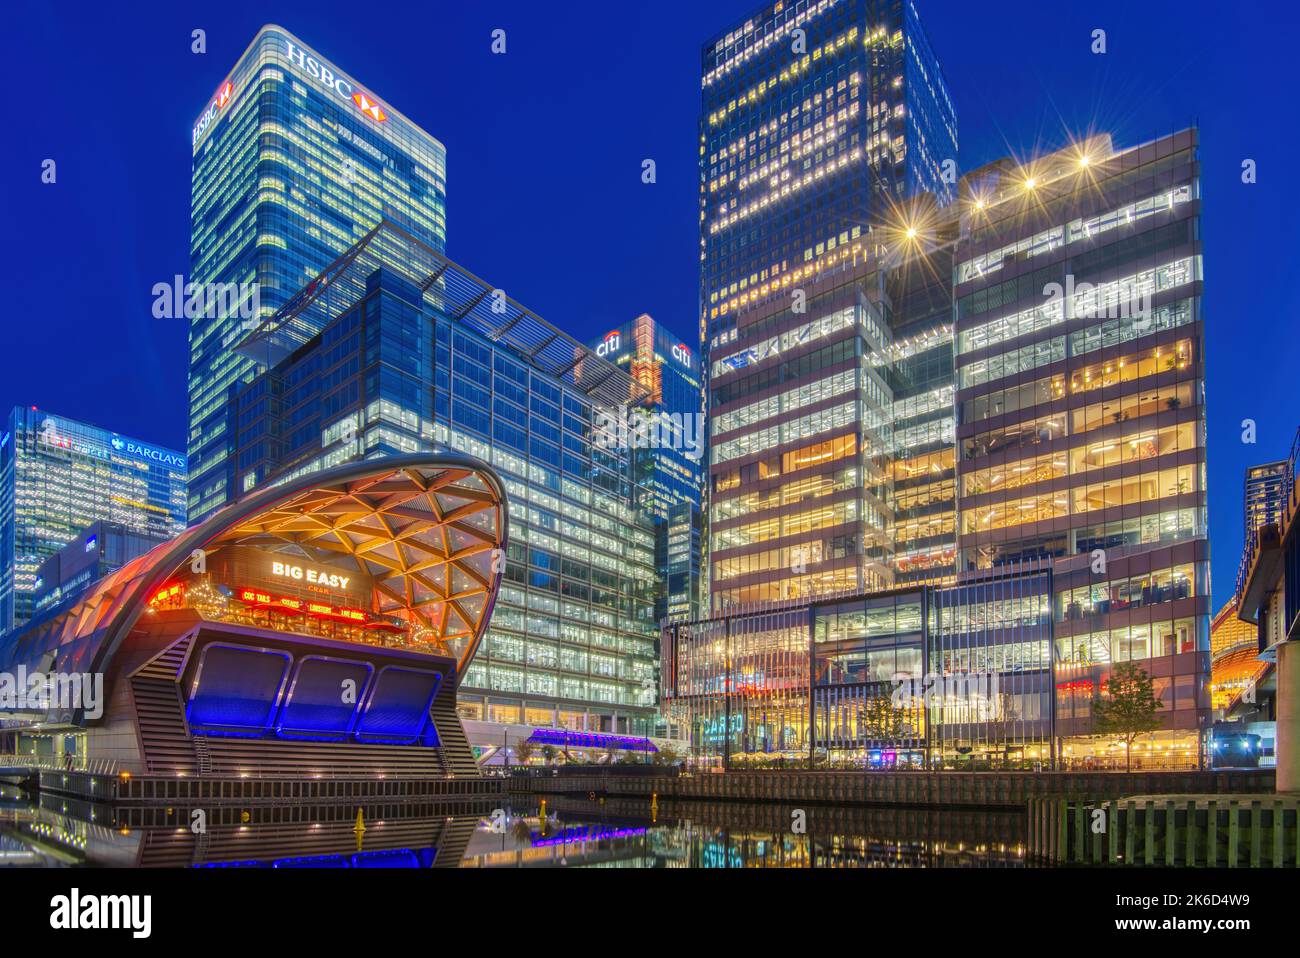 Twilight nighttime image of Canary Wharf London showing building lights. Stock Photo